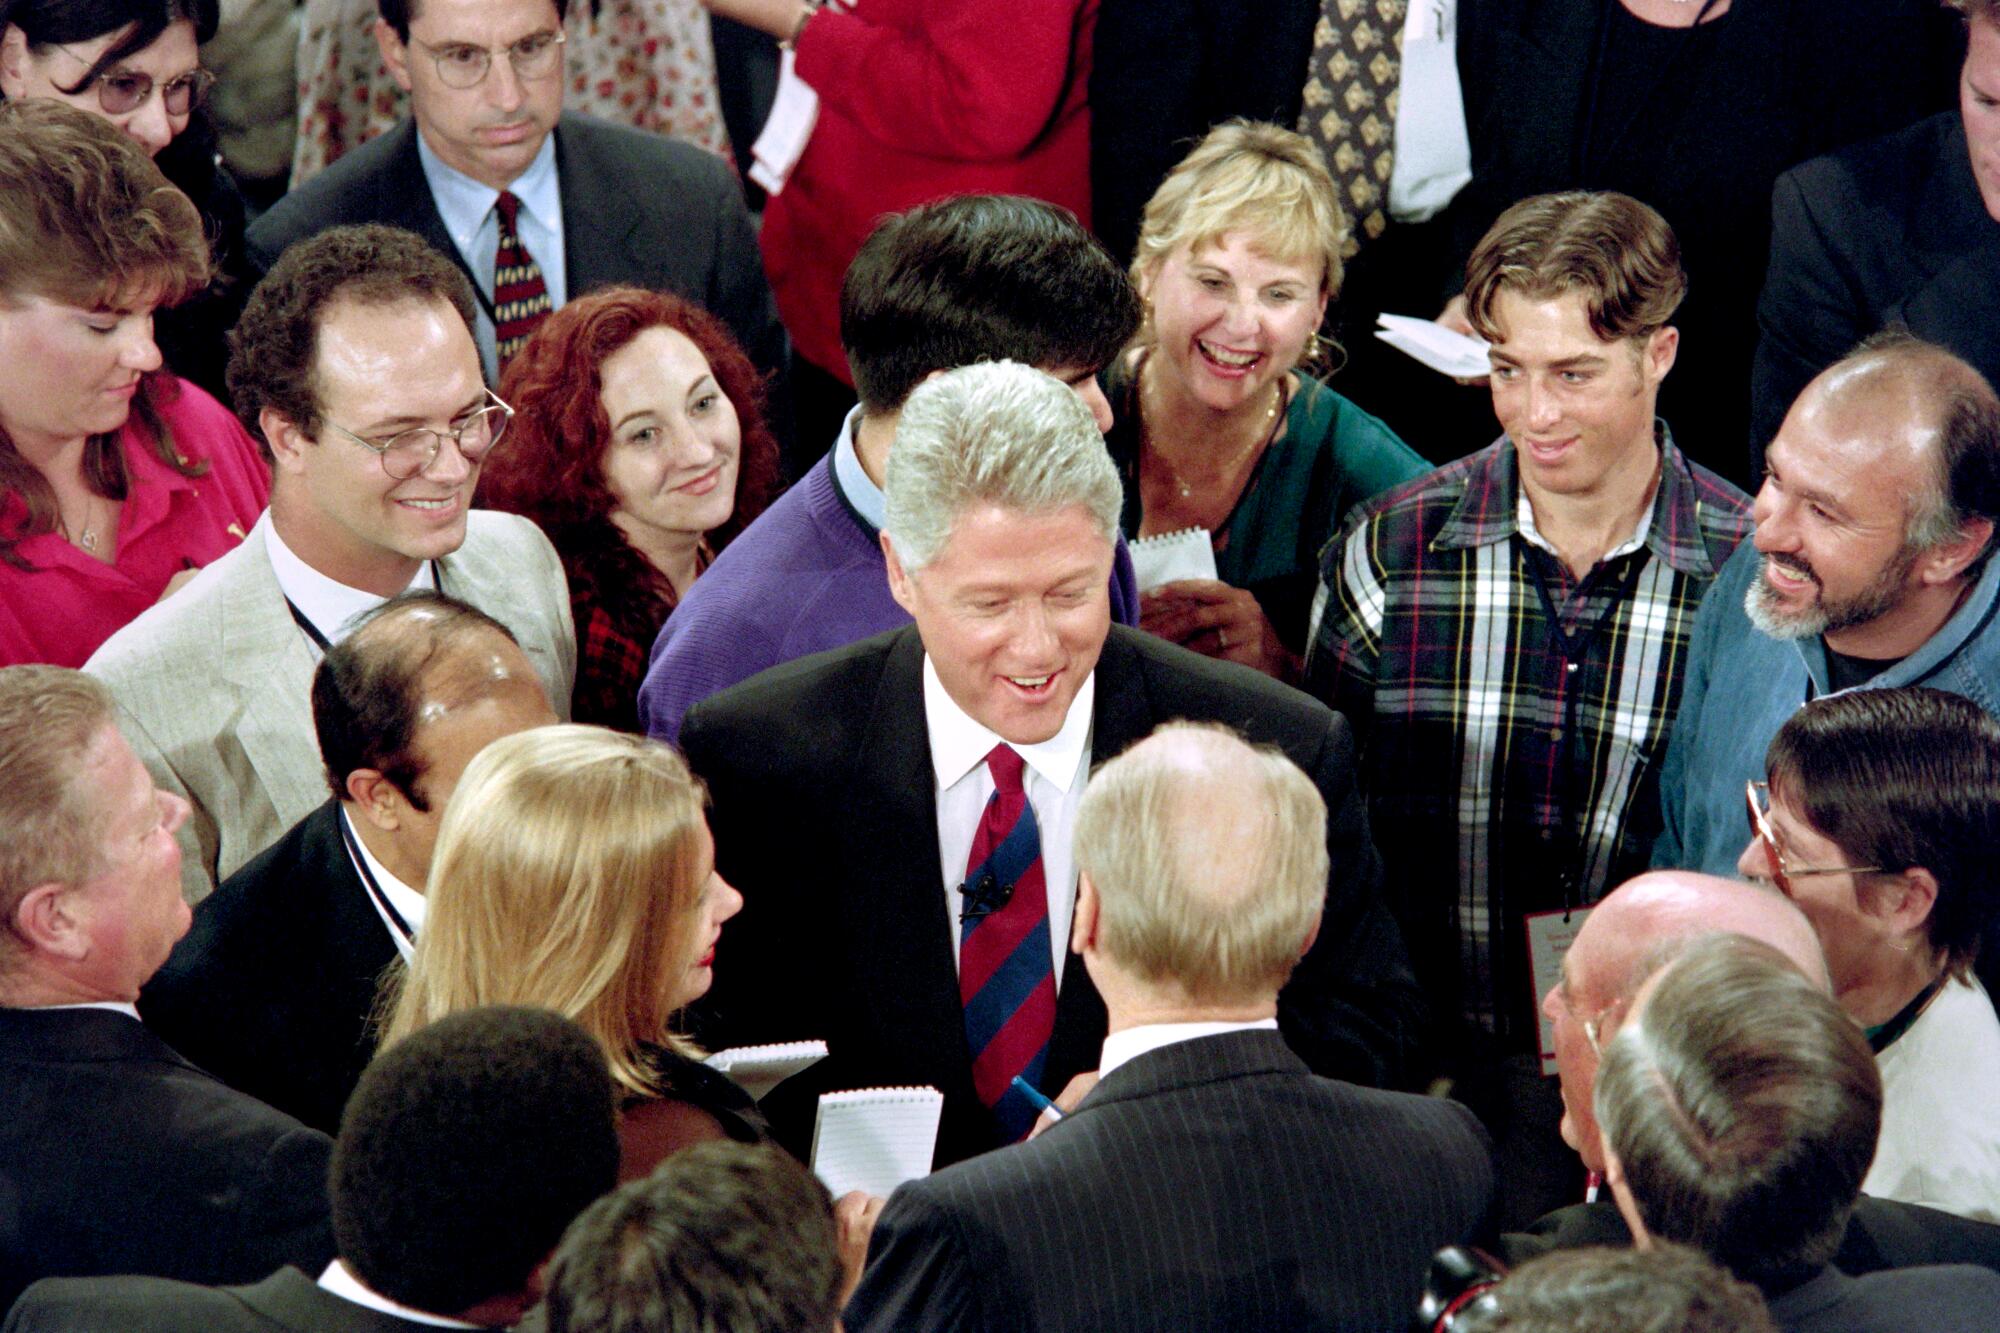 Bill Clinton stands in a small crowd of people, smiling.